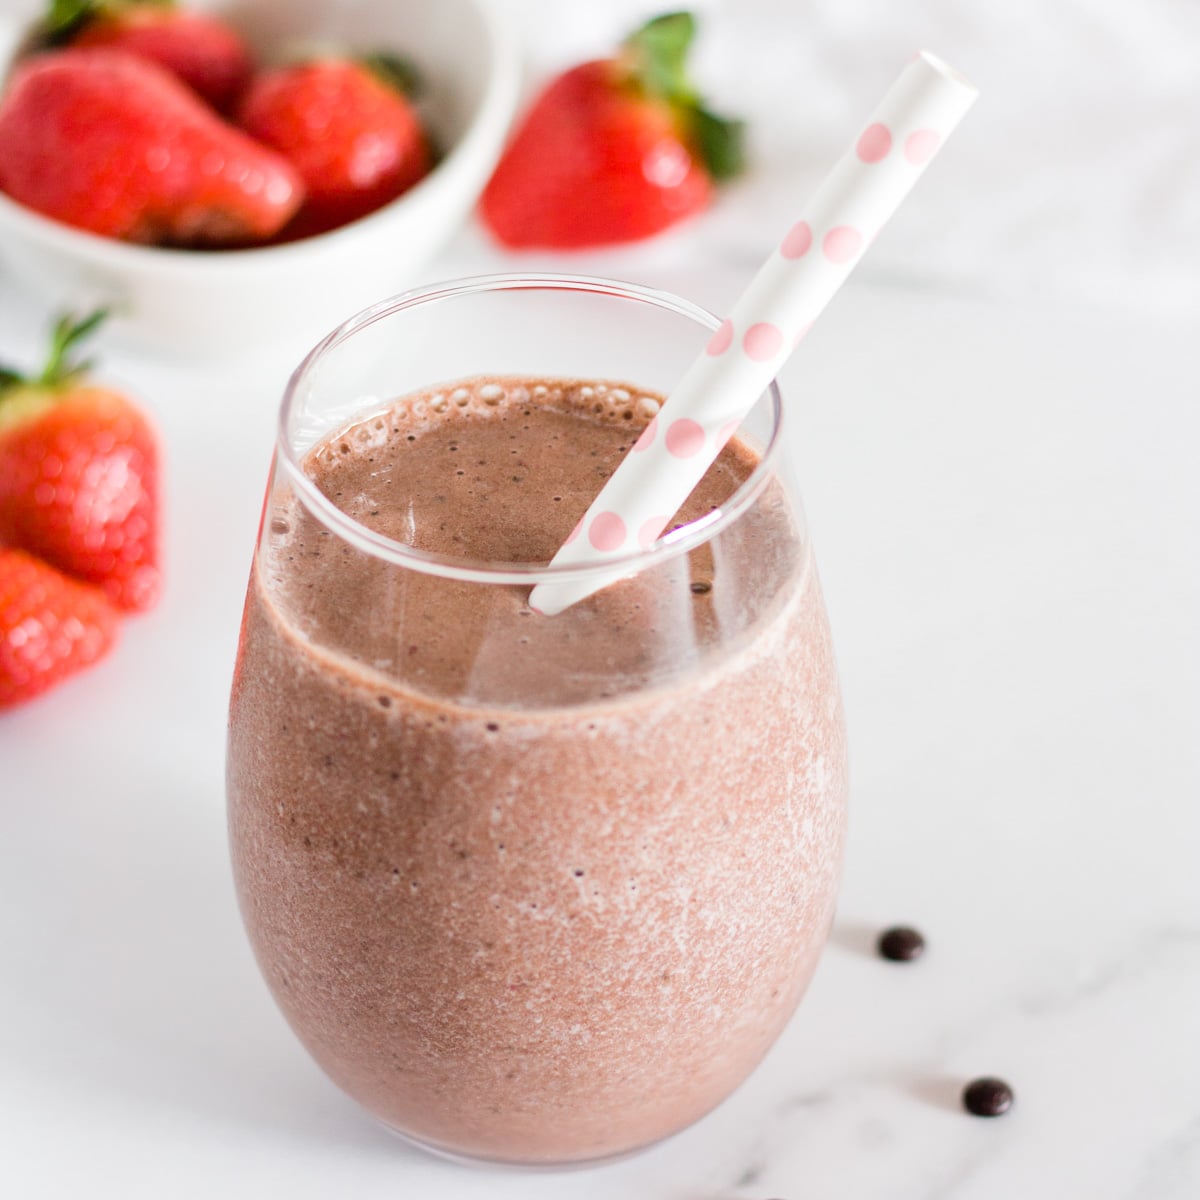 strawberry banana chocolate smoothie in a glass